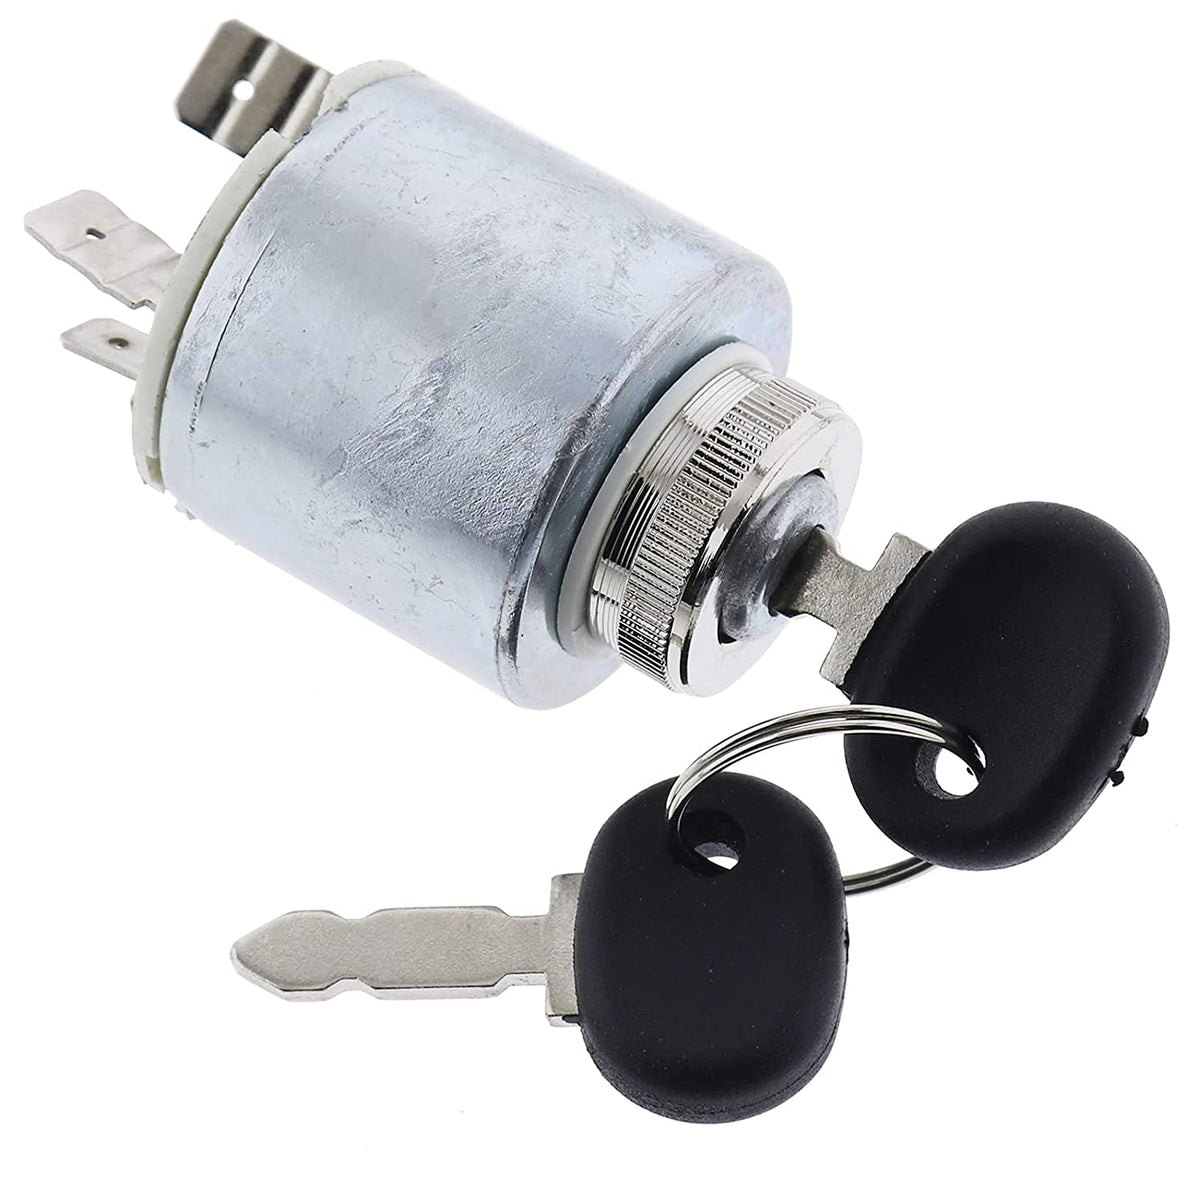 Ignition Switch 5146155 5129862 for New.Holland Tractor 3830 4030 4230 4430 TD4020F TD4030F TD4040F TD5010 TD5020 TD5030 Case JX55 JX60 JX65 JX70 JX75 JX80 JX85 JX90 JX95 - KUDUPARTS